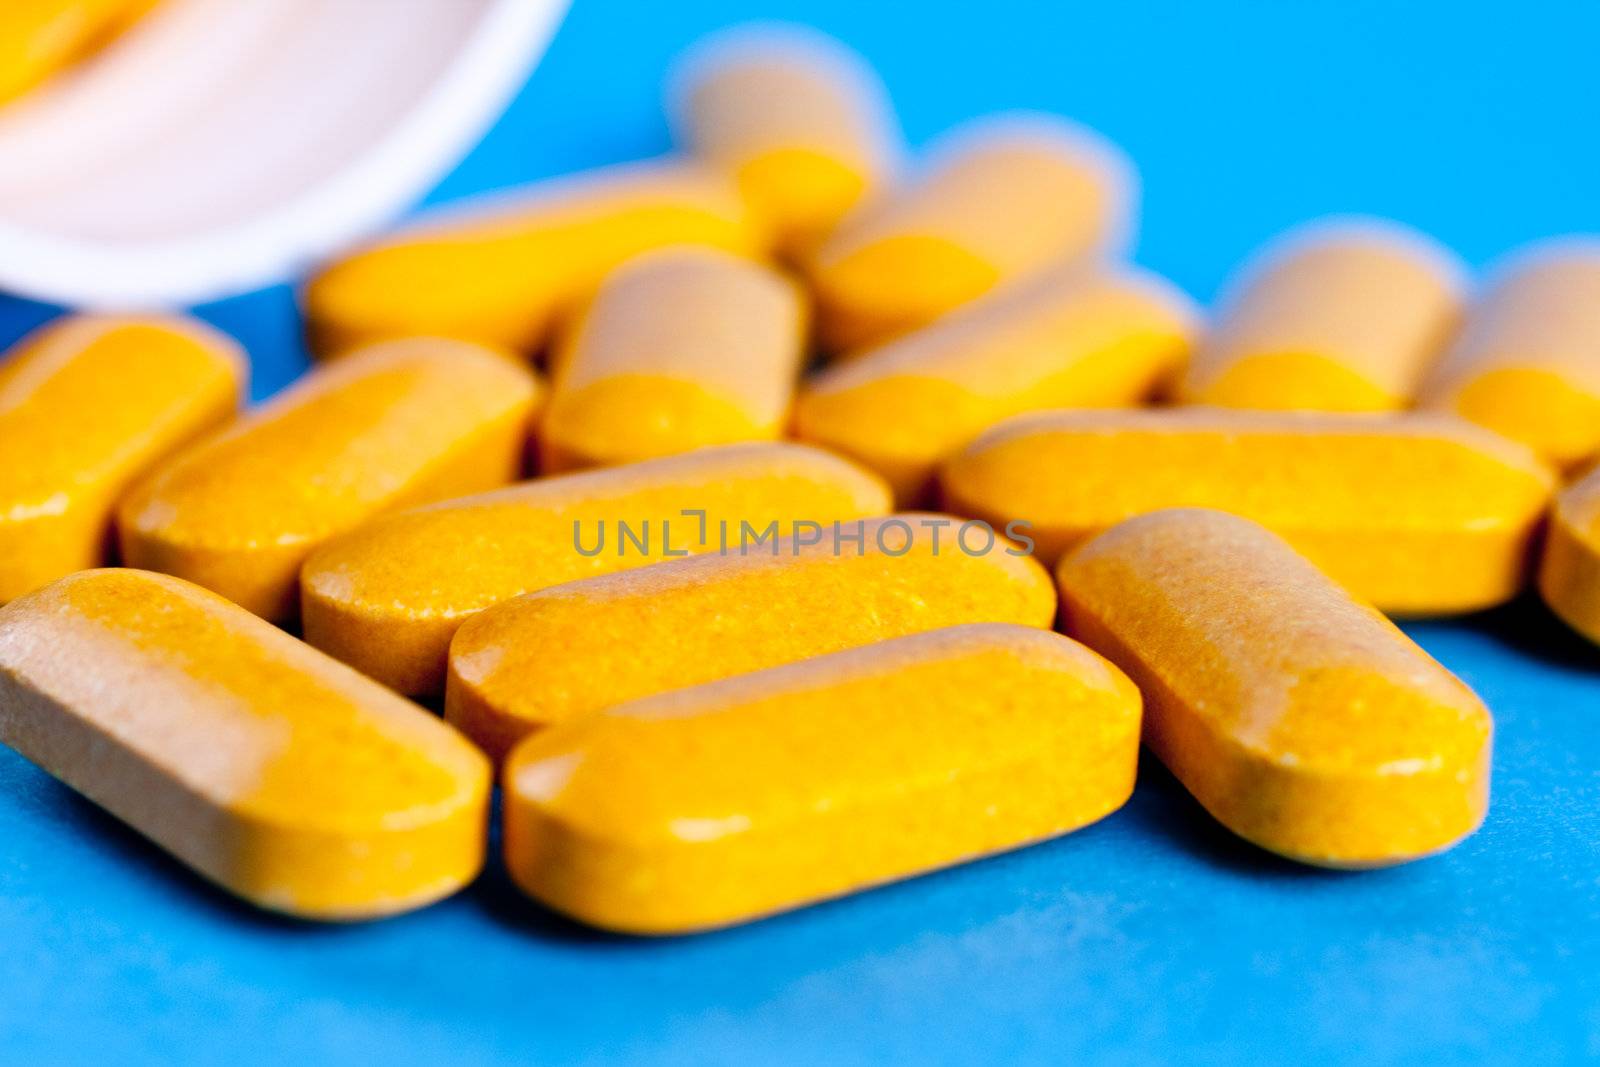 supplements in pill form on a blue background